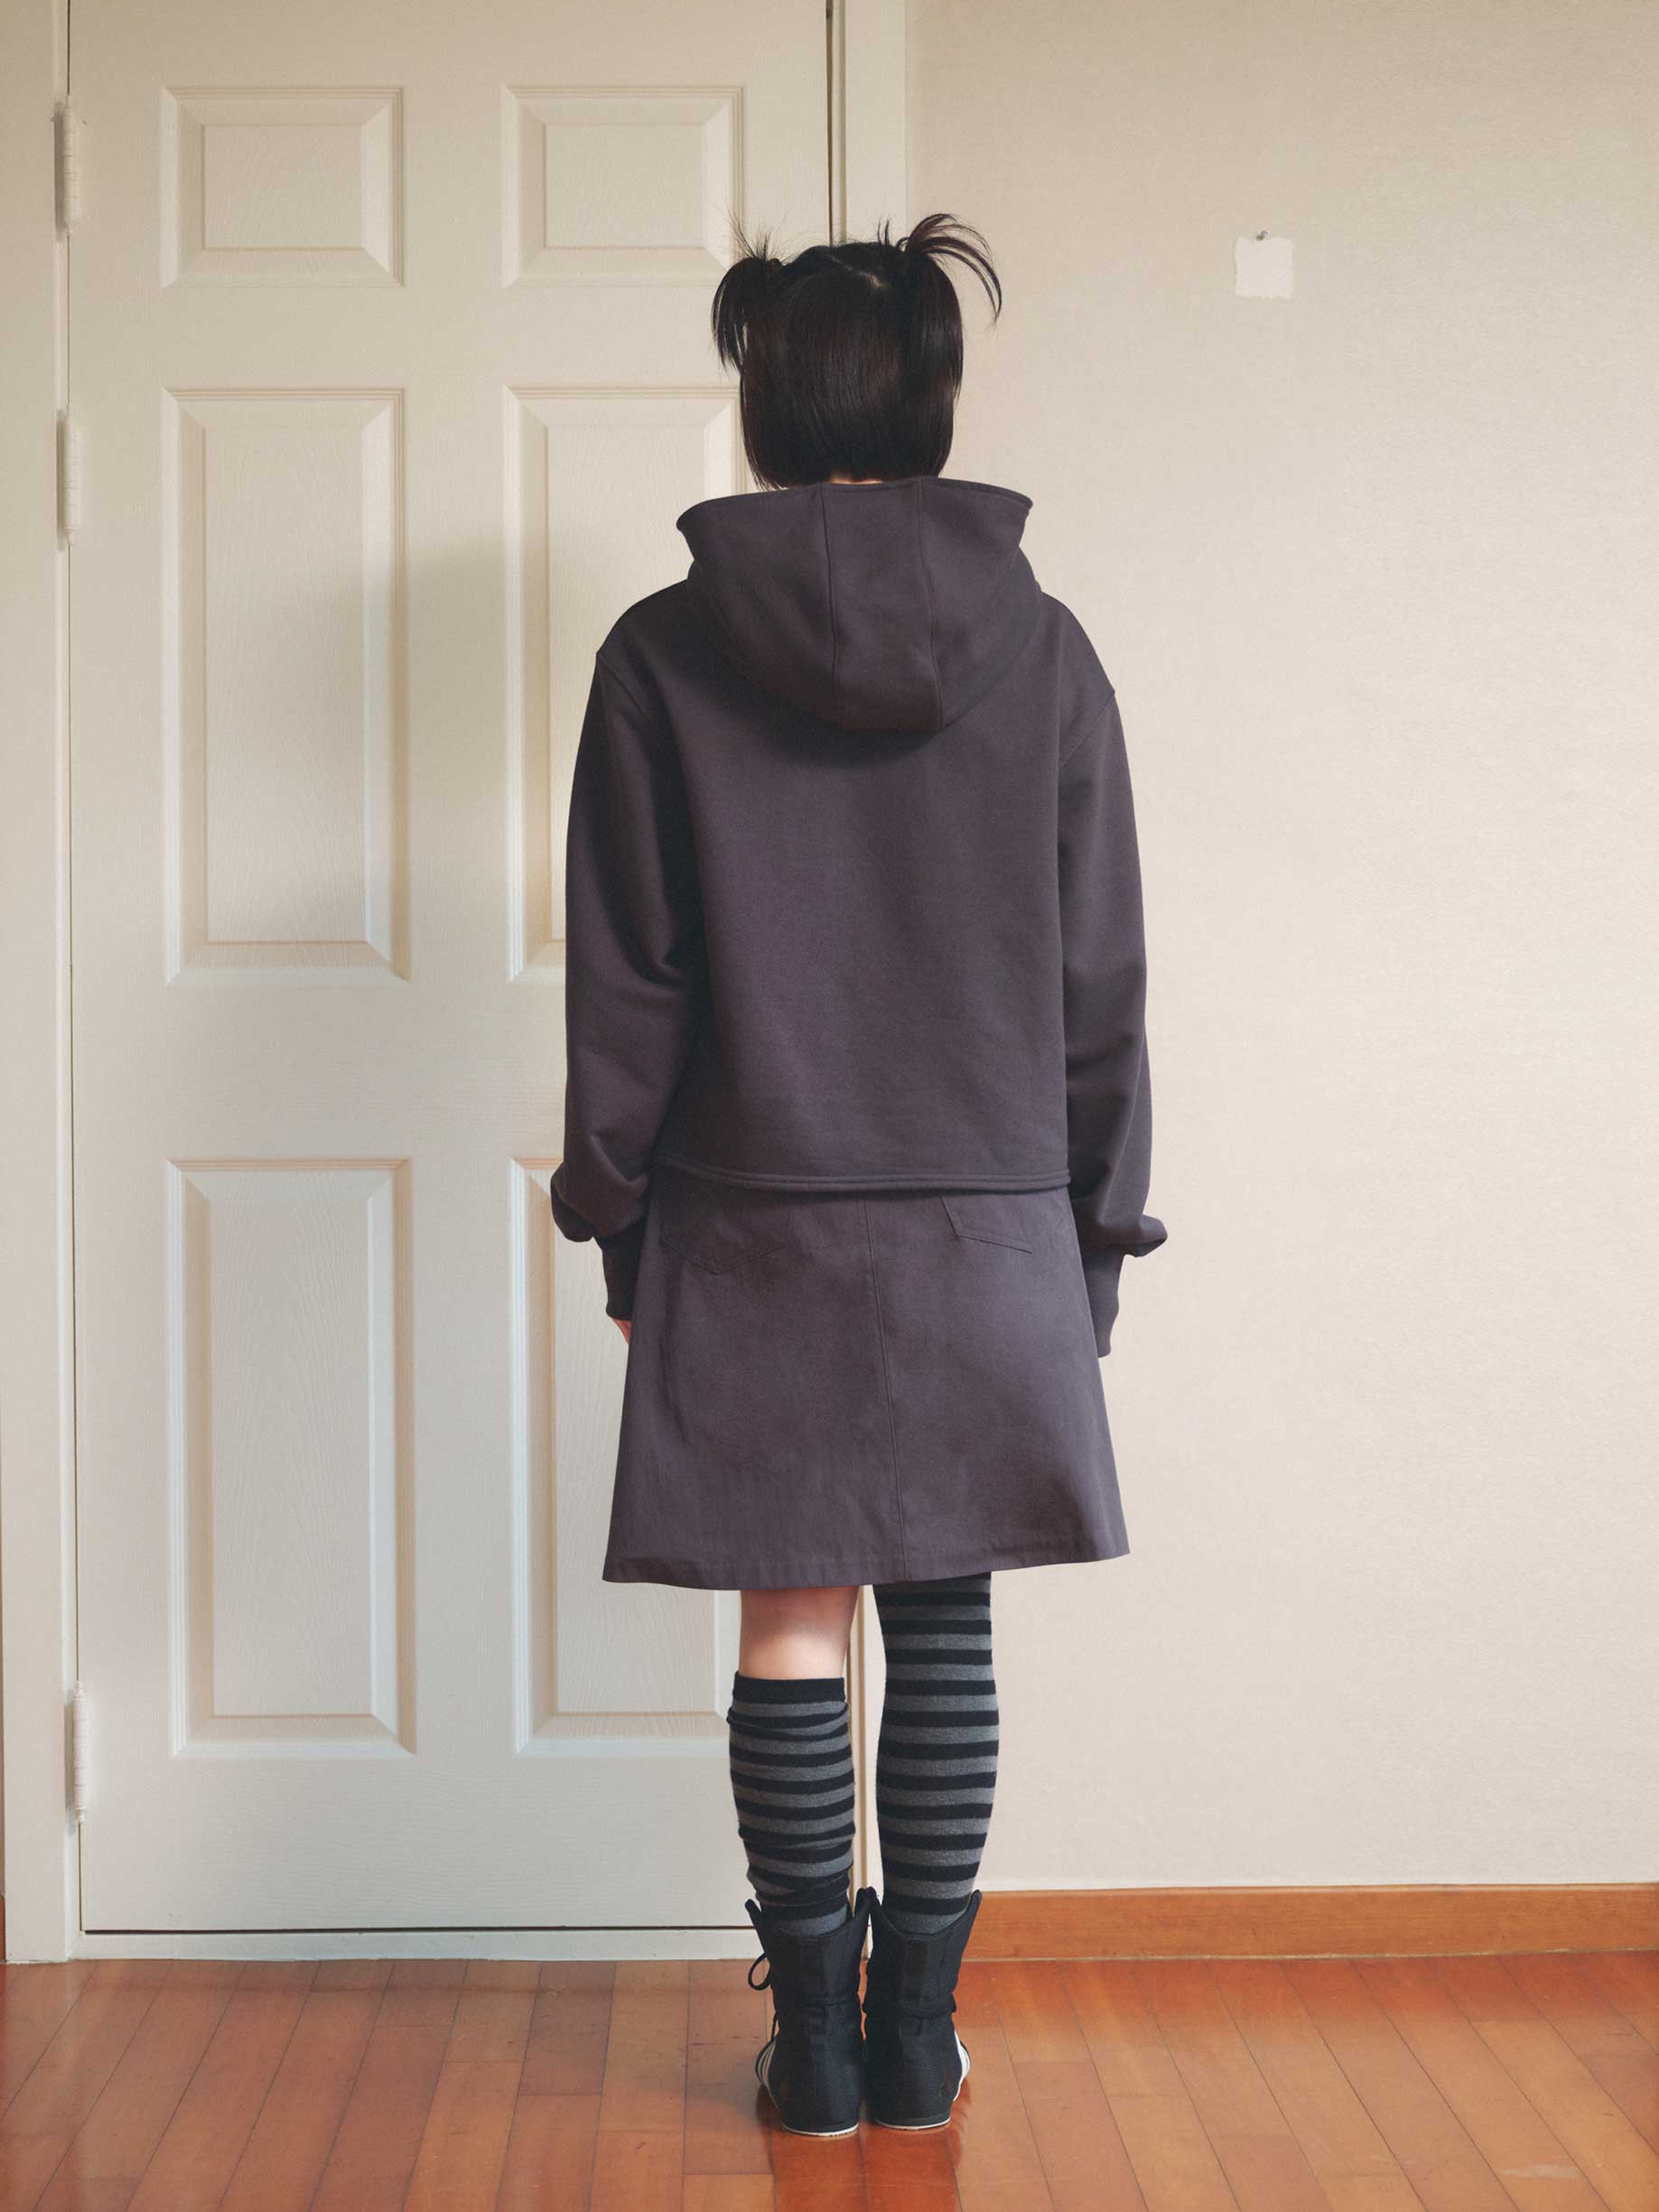 Hugging Button-up hoodie (charcoal)